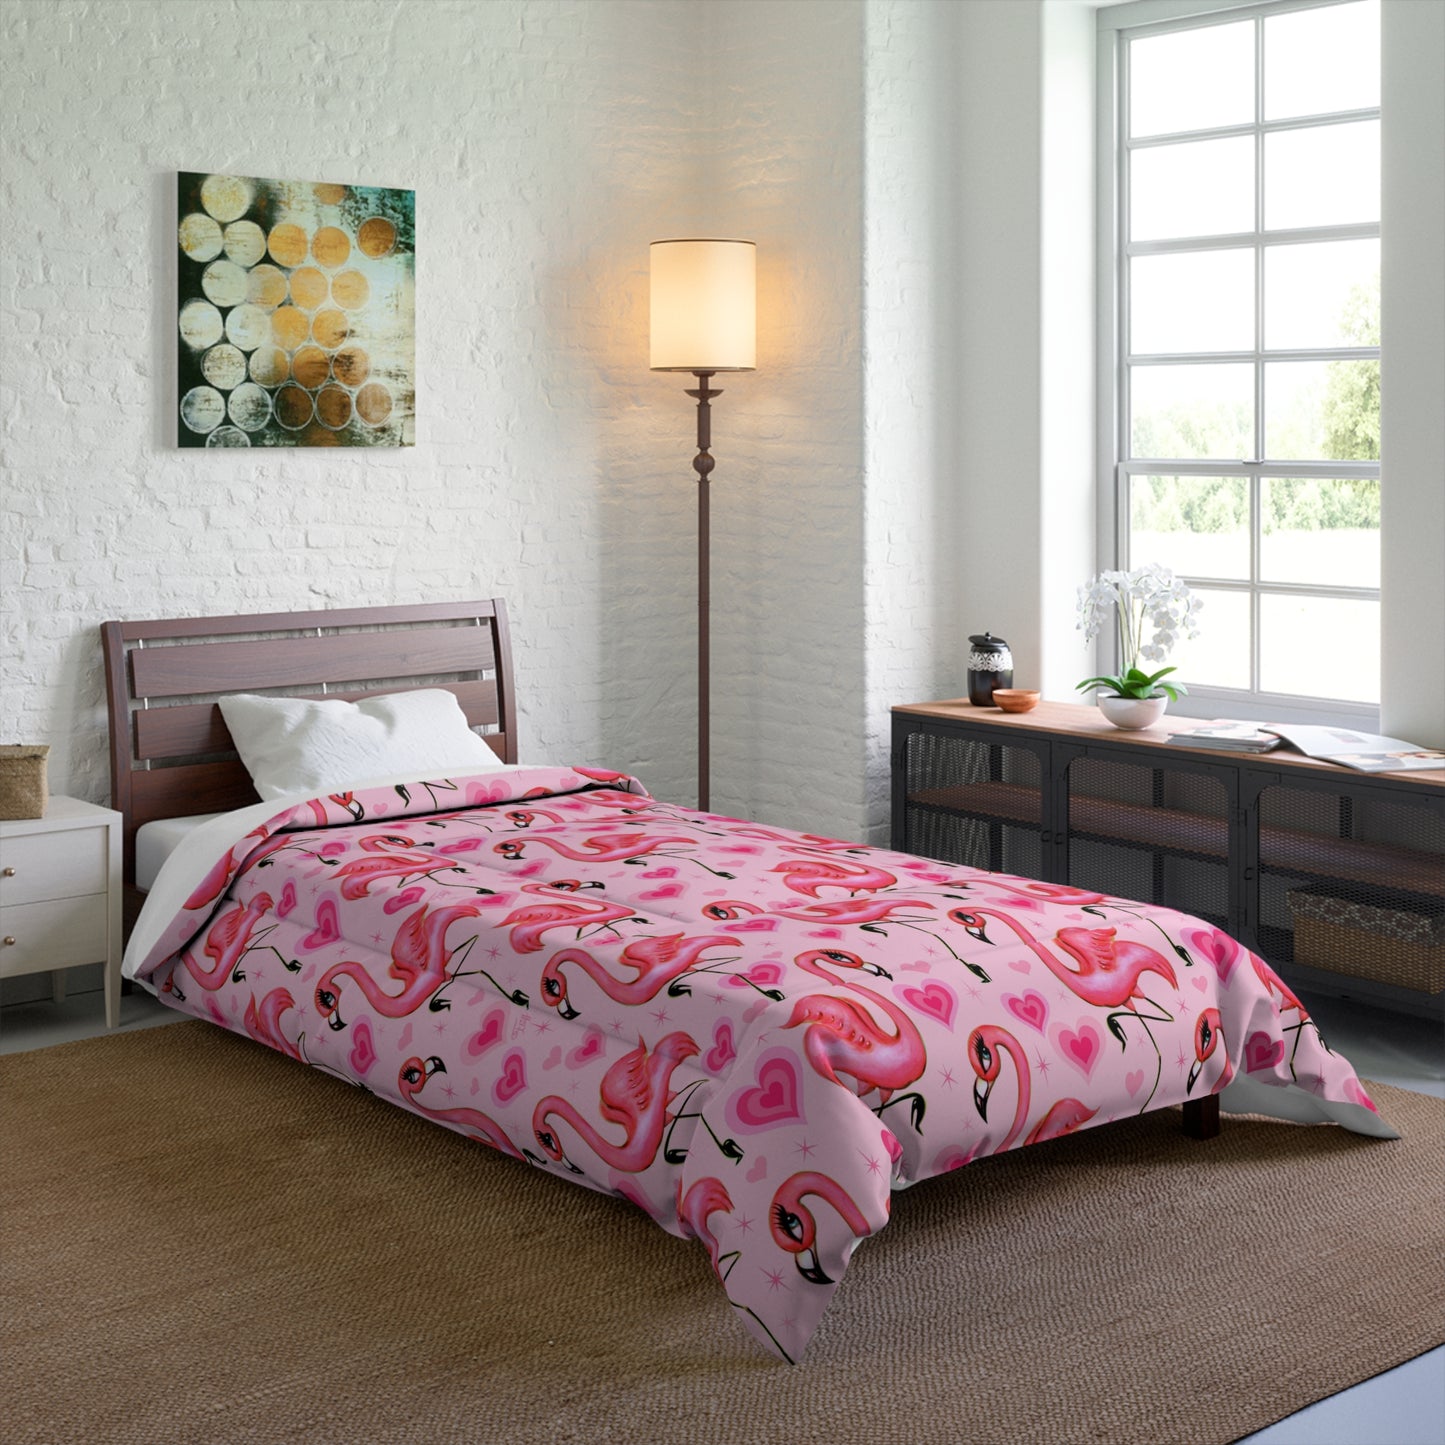 Flamingos and Hearts Pink  • Comforter